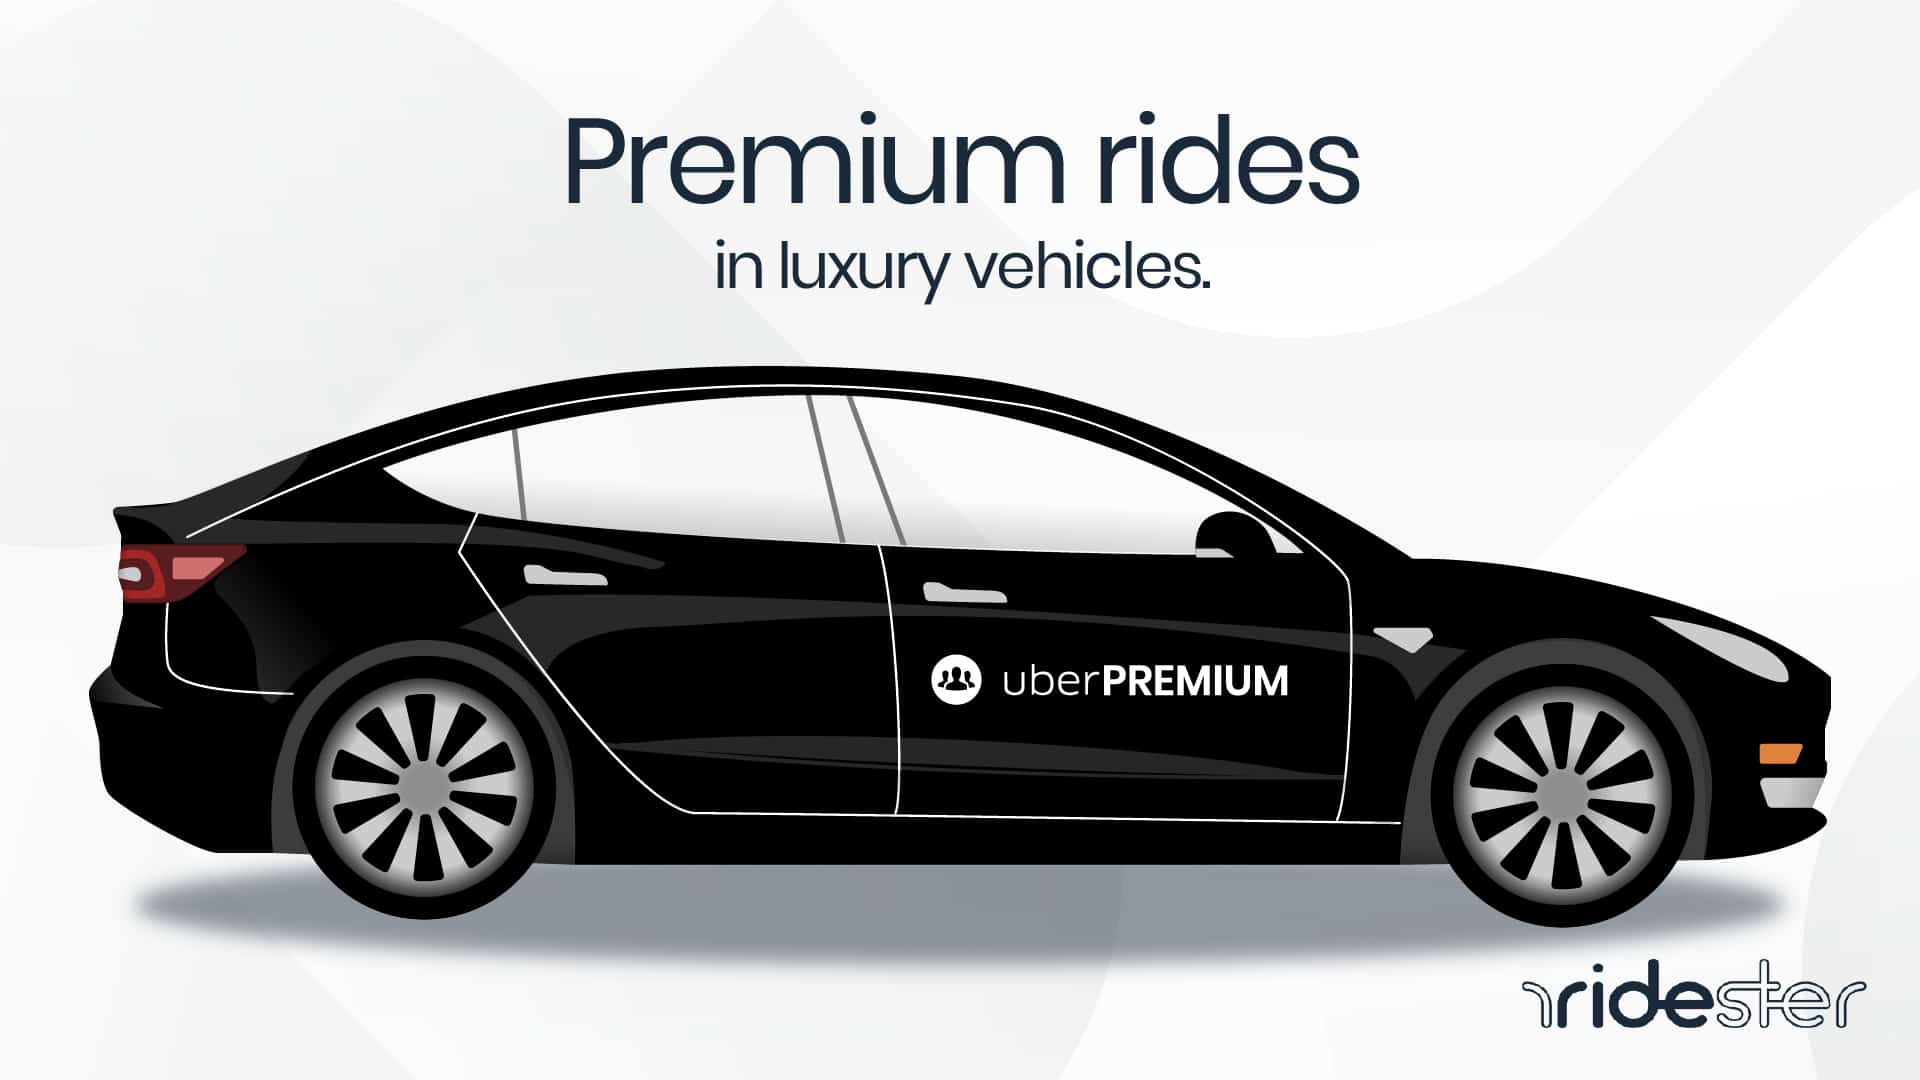 Vector graphic showing Uber Premium vehicle with tagline about the service